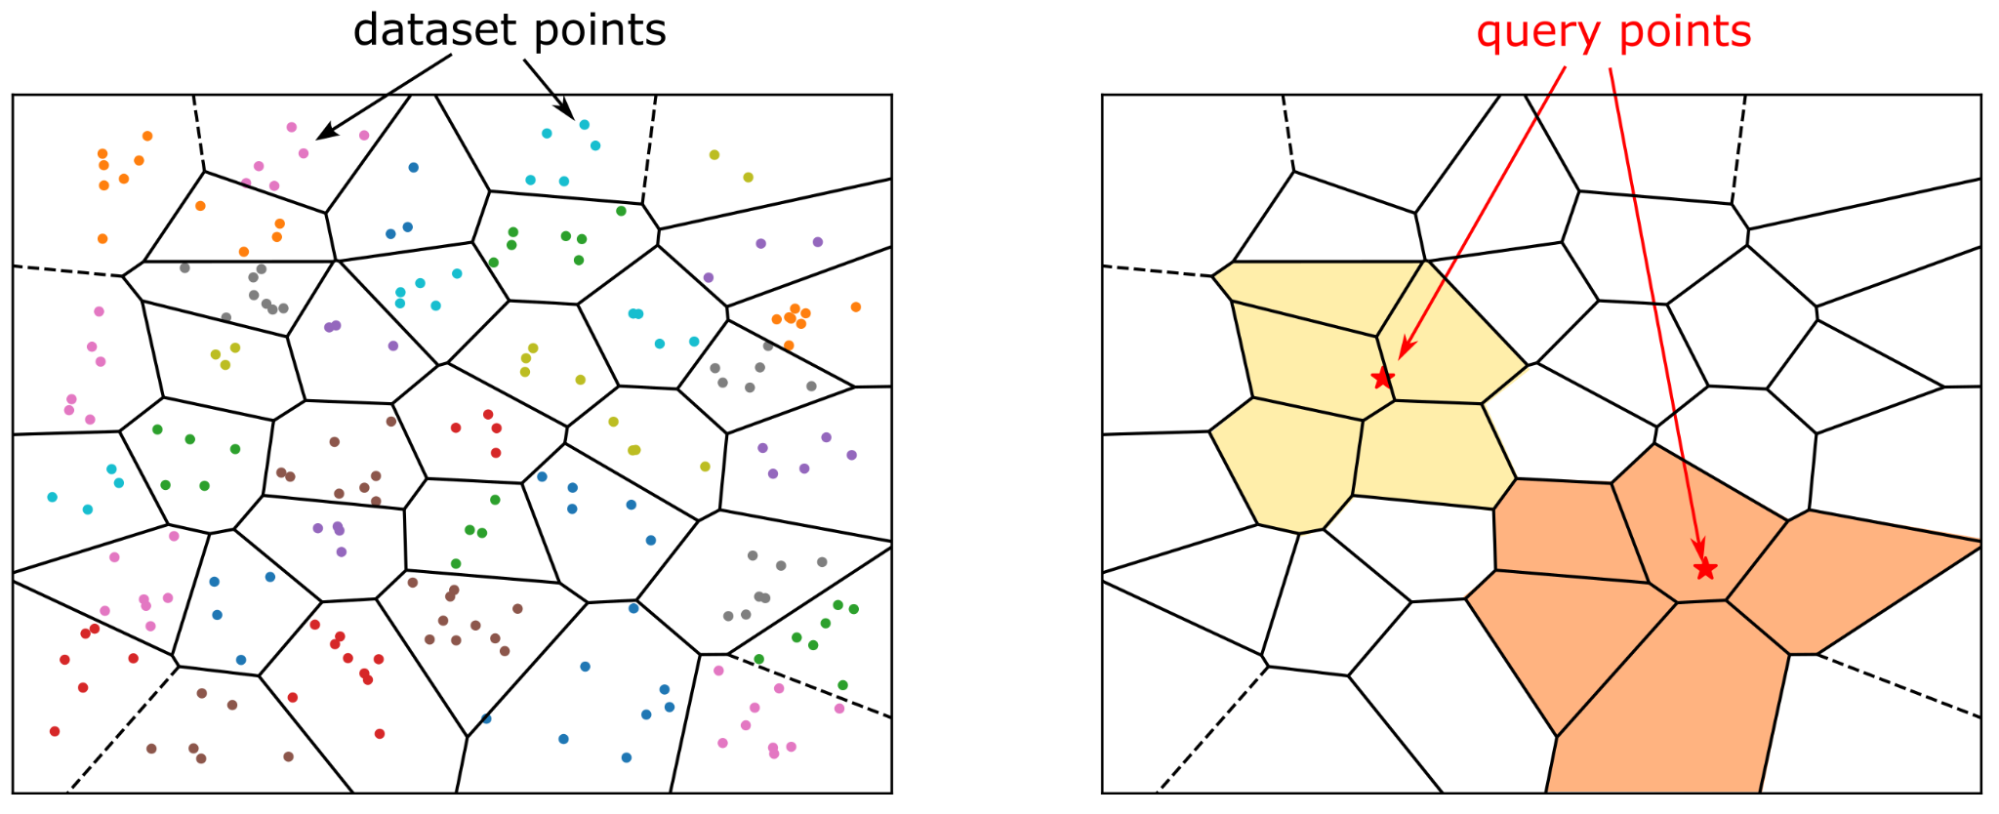 Two diagrams show a) dataset points grouped into clusters and b) a subset of the clusters highlighted.